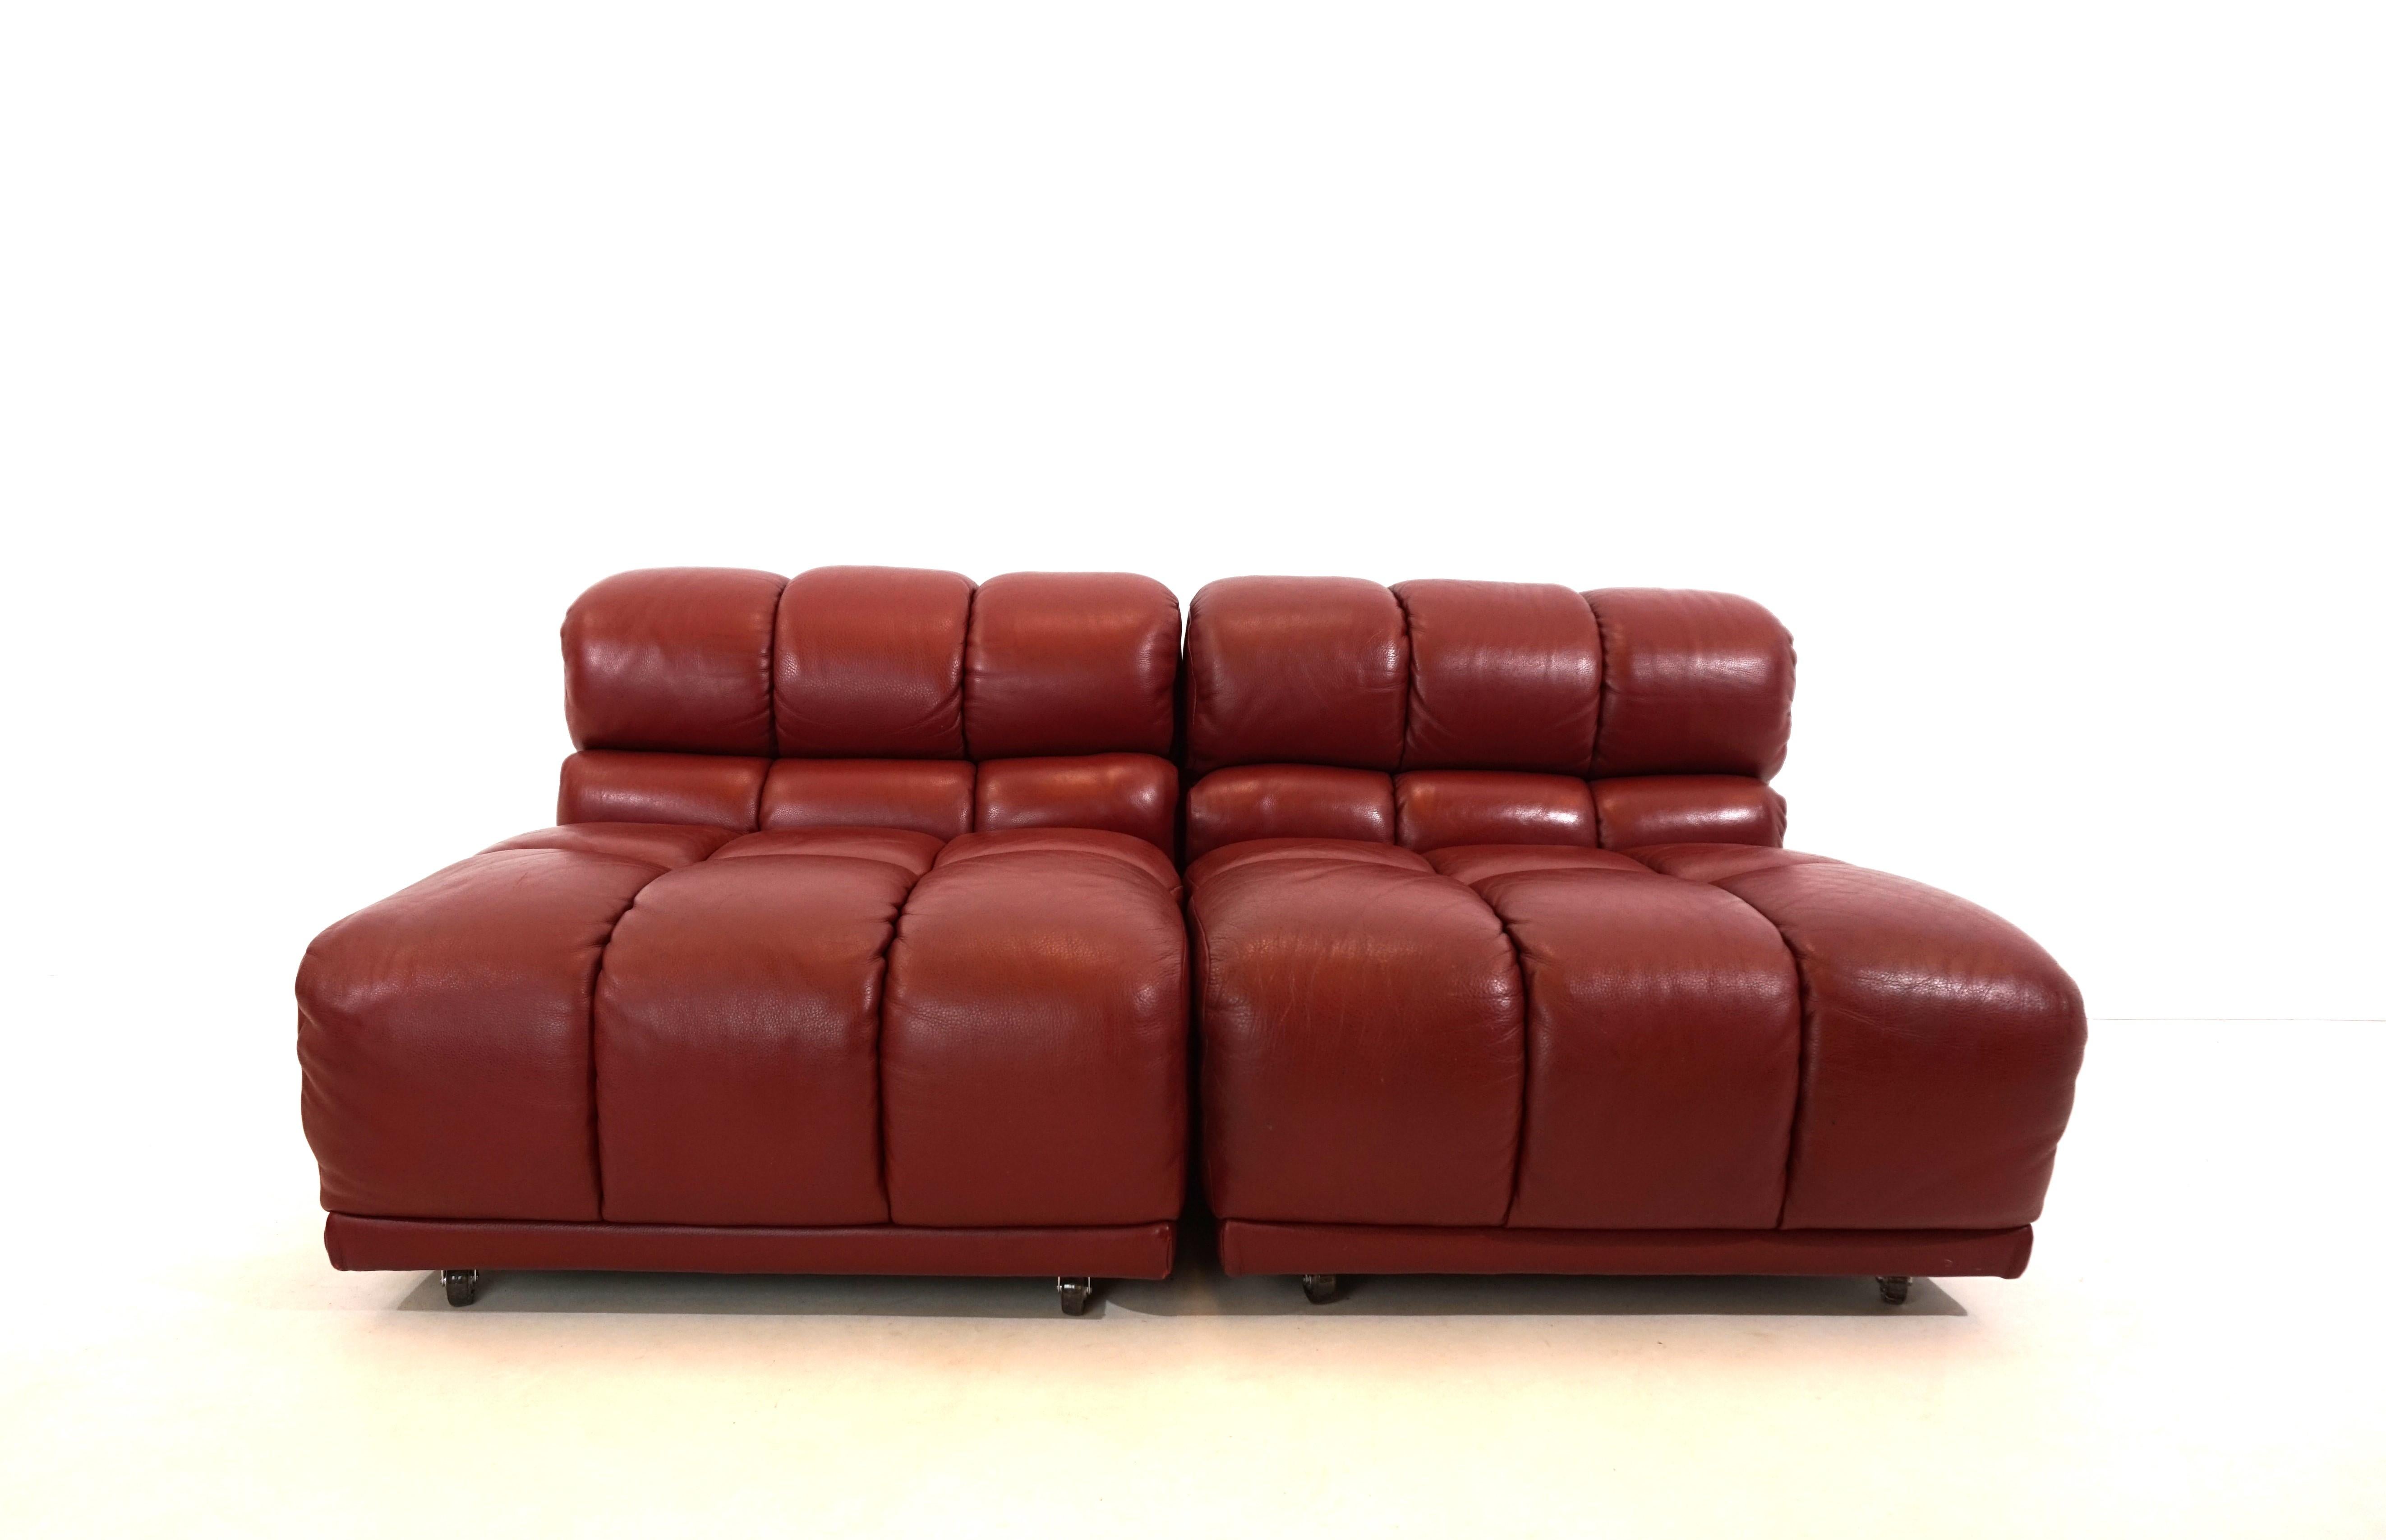 The set of 2 modular armchairs comes in fantastic condition. The leather is a very high quality, thick and at the same time soft quality. The seams are of high quality. The lines with the deep cuts in the cassettes indicate an Italian manufacturer.